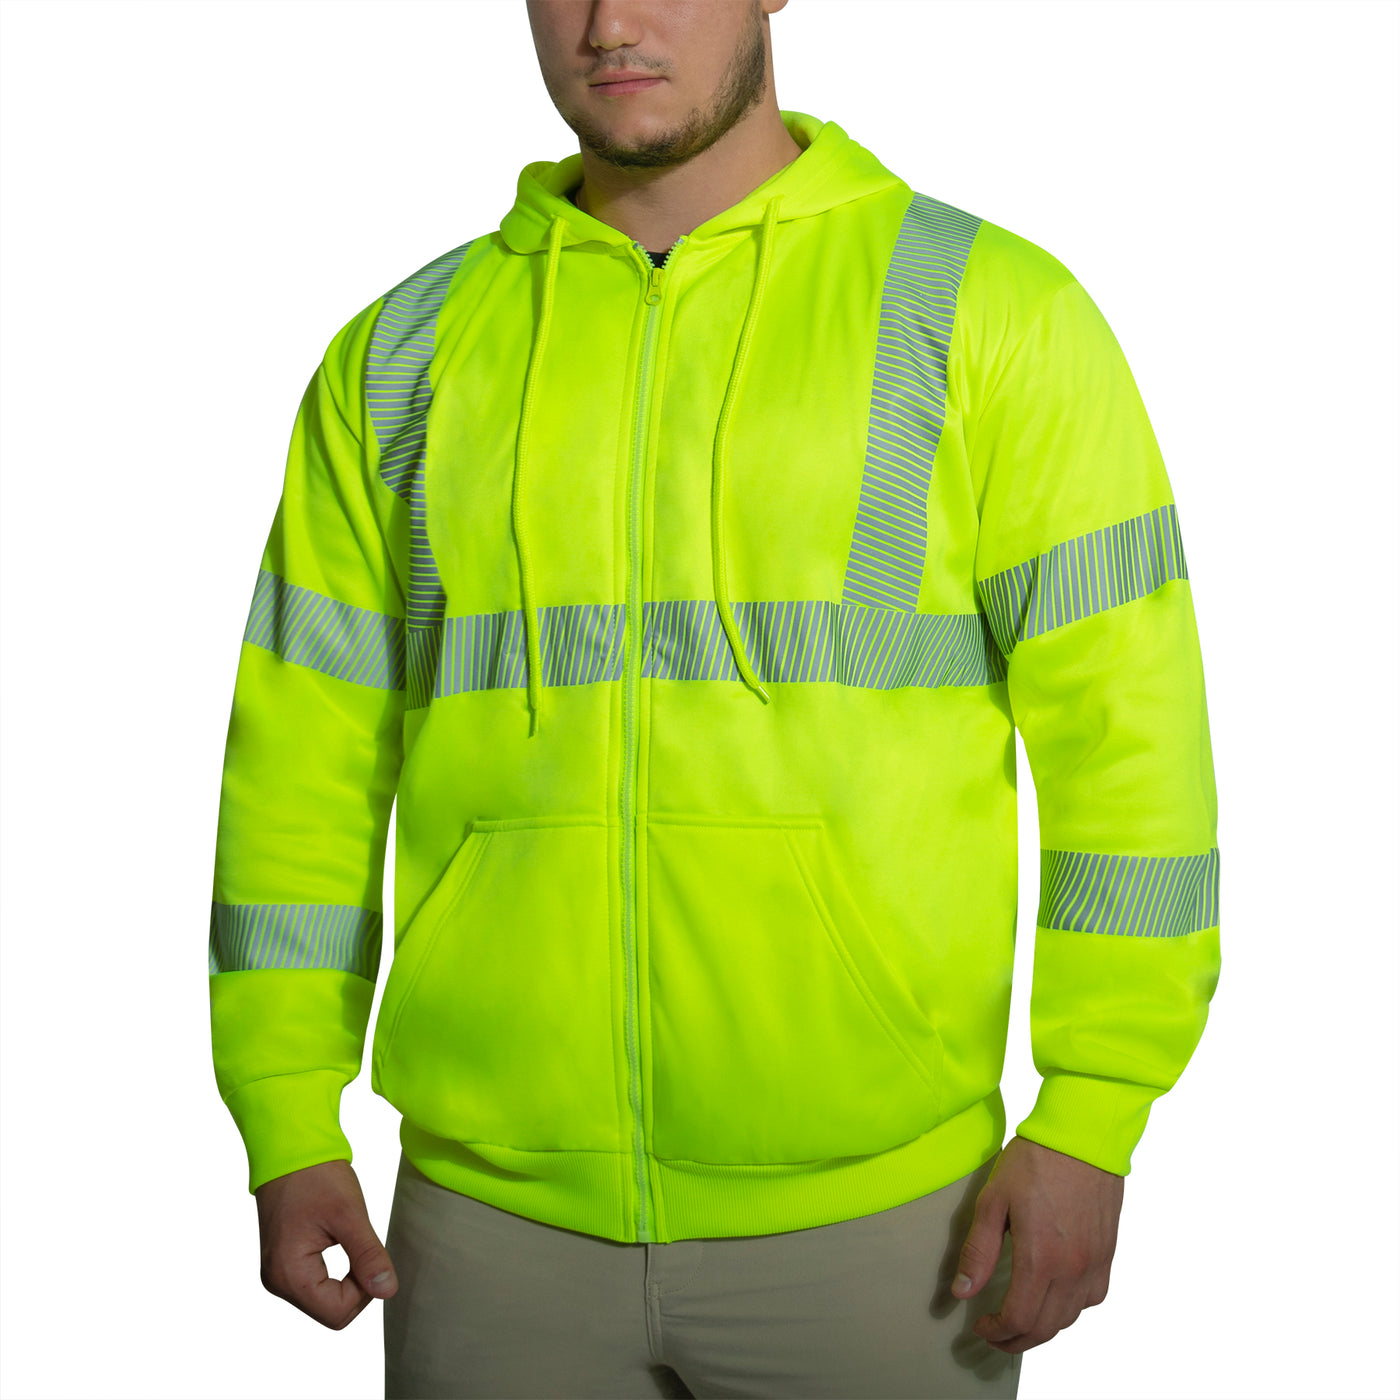 Safety Clothing, Gear and Reflective Gear